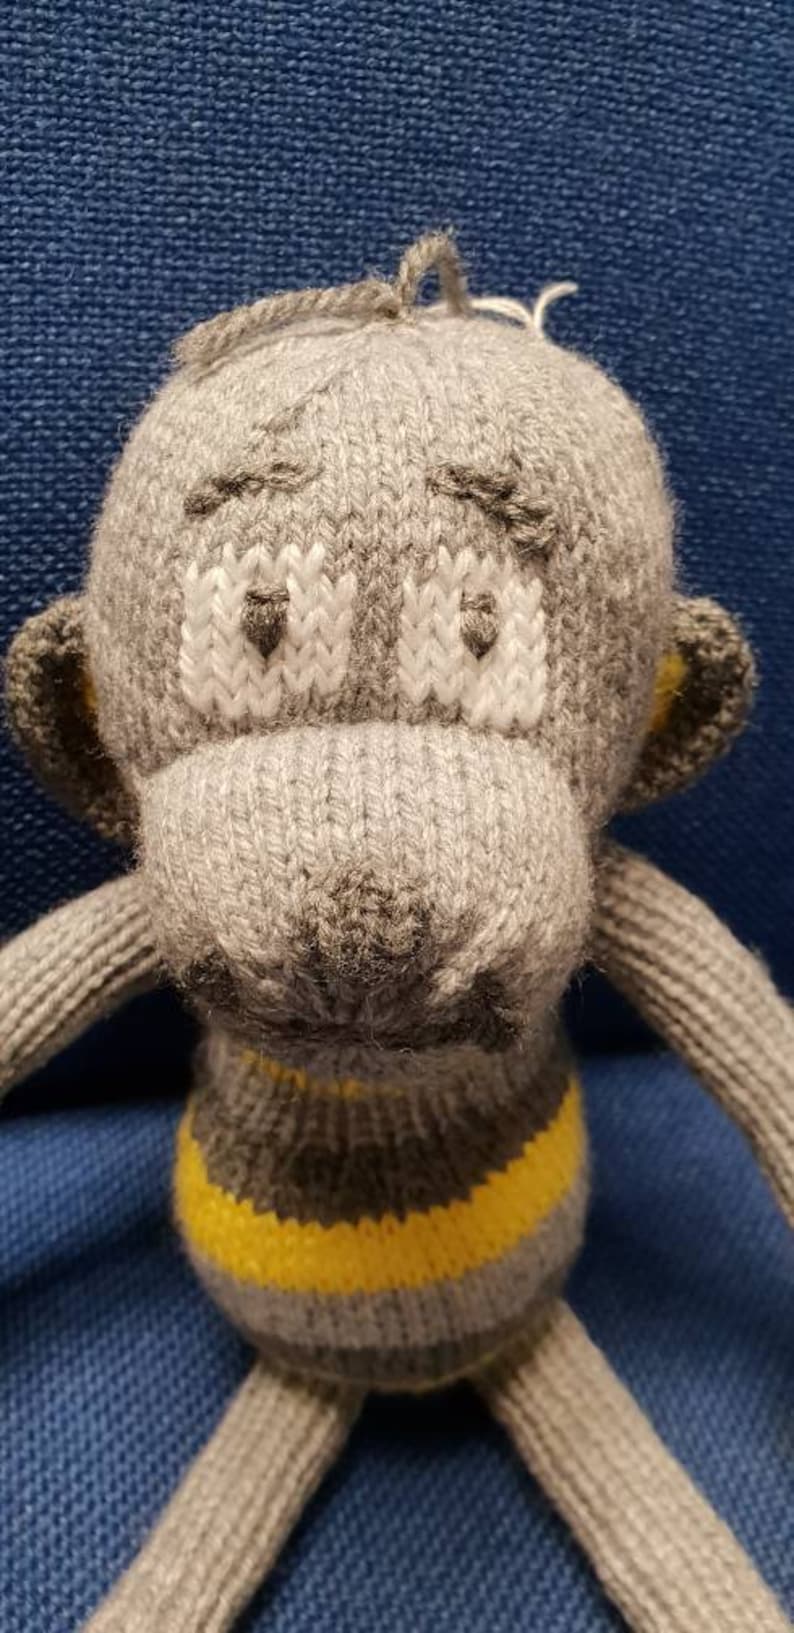 Hand knitted cheeky monkey cuddly toy